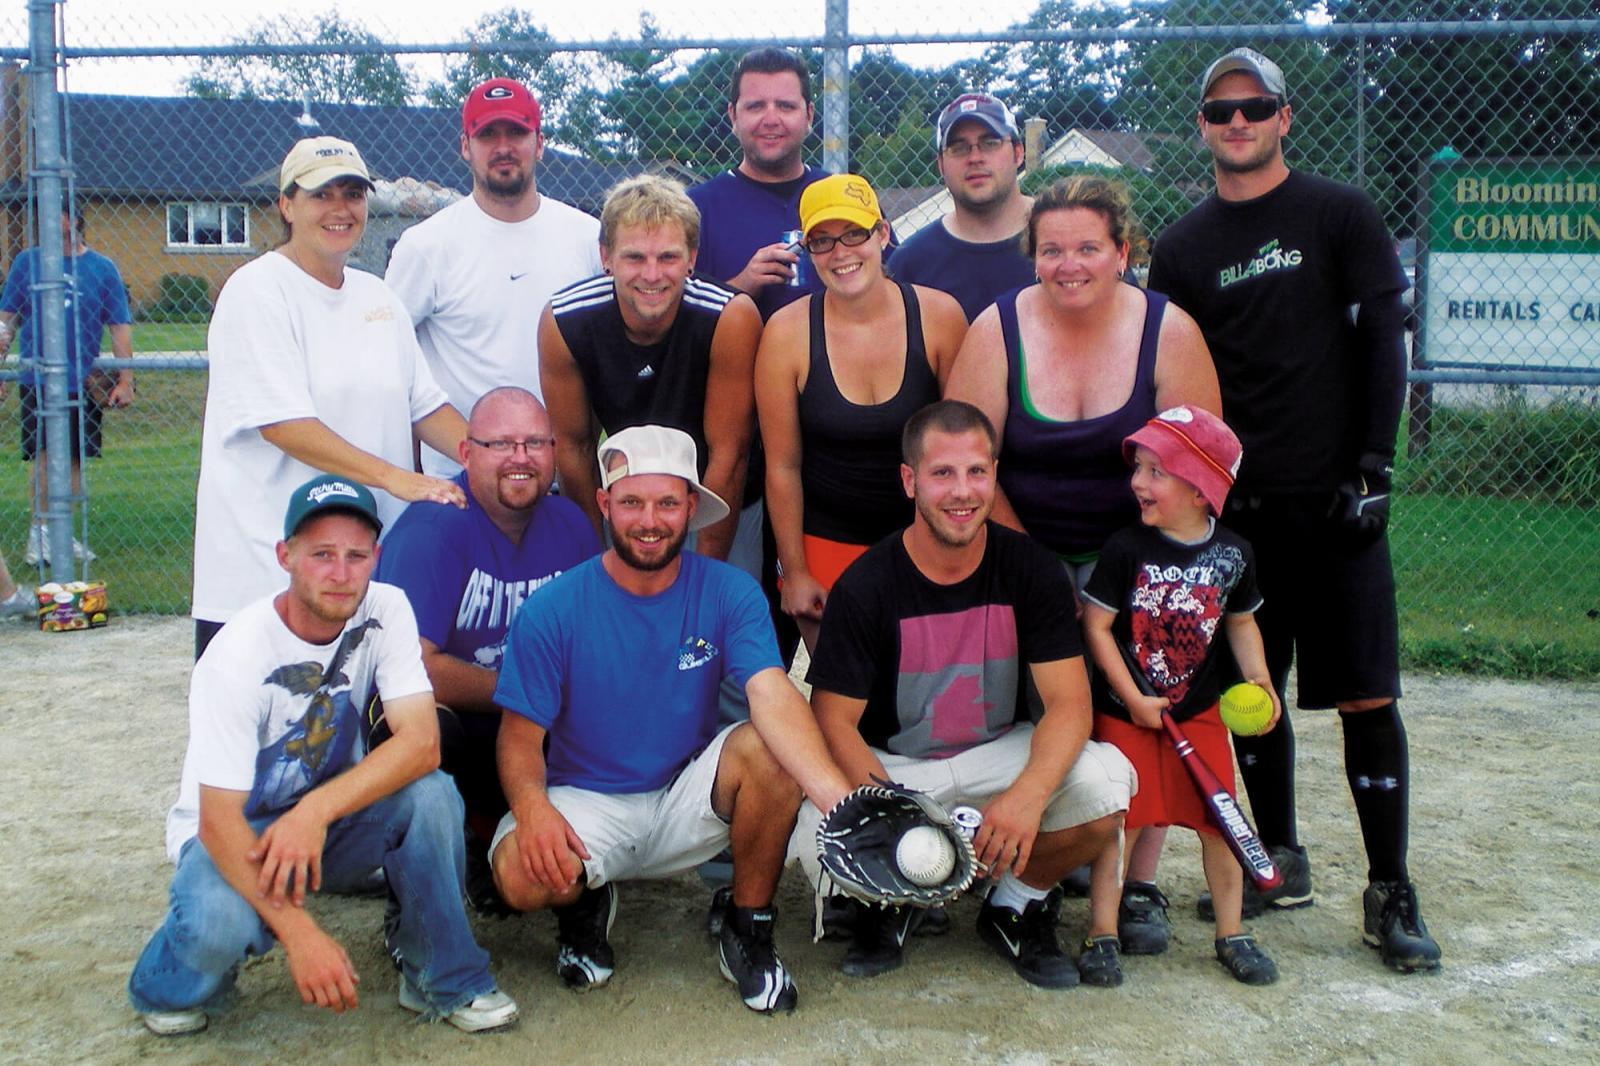 Moser Landscapes, winners of the 2010 Waterloo Chapter baseball tournament.